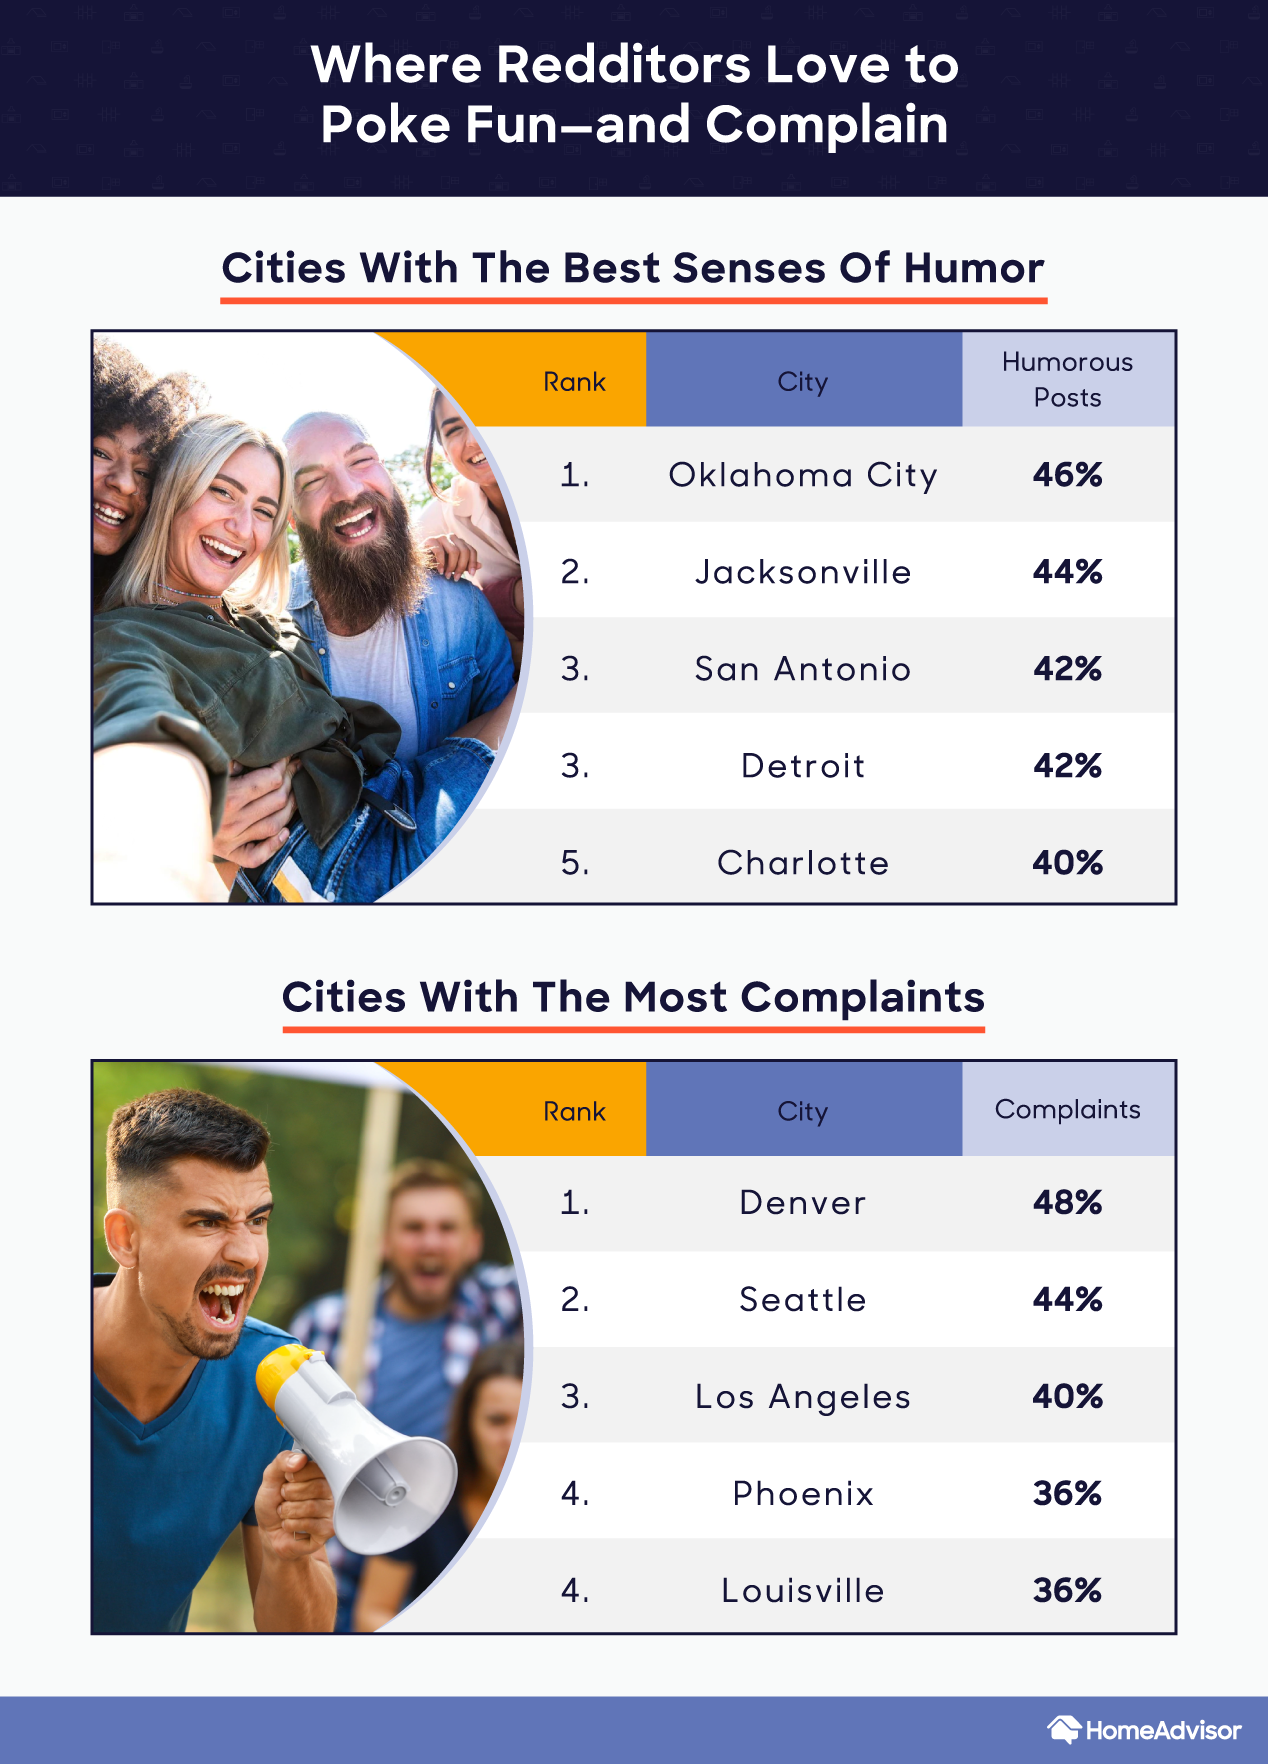 a list of the cities with the best senses of humor and most complaints